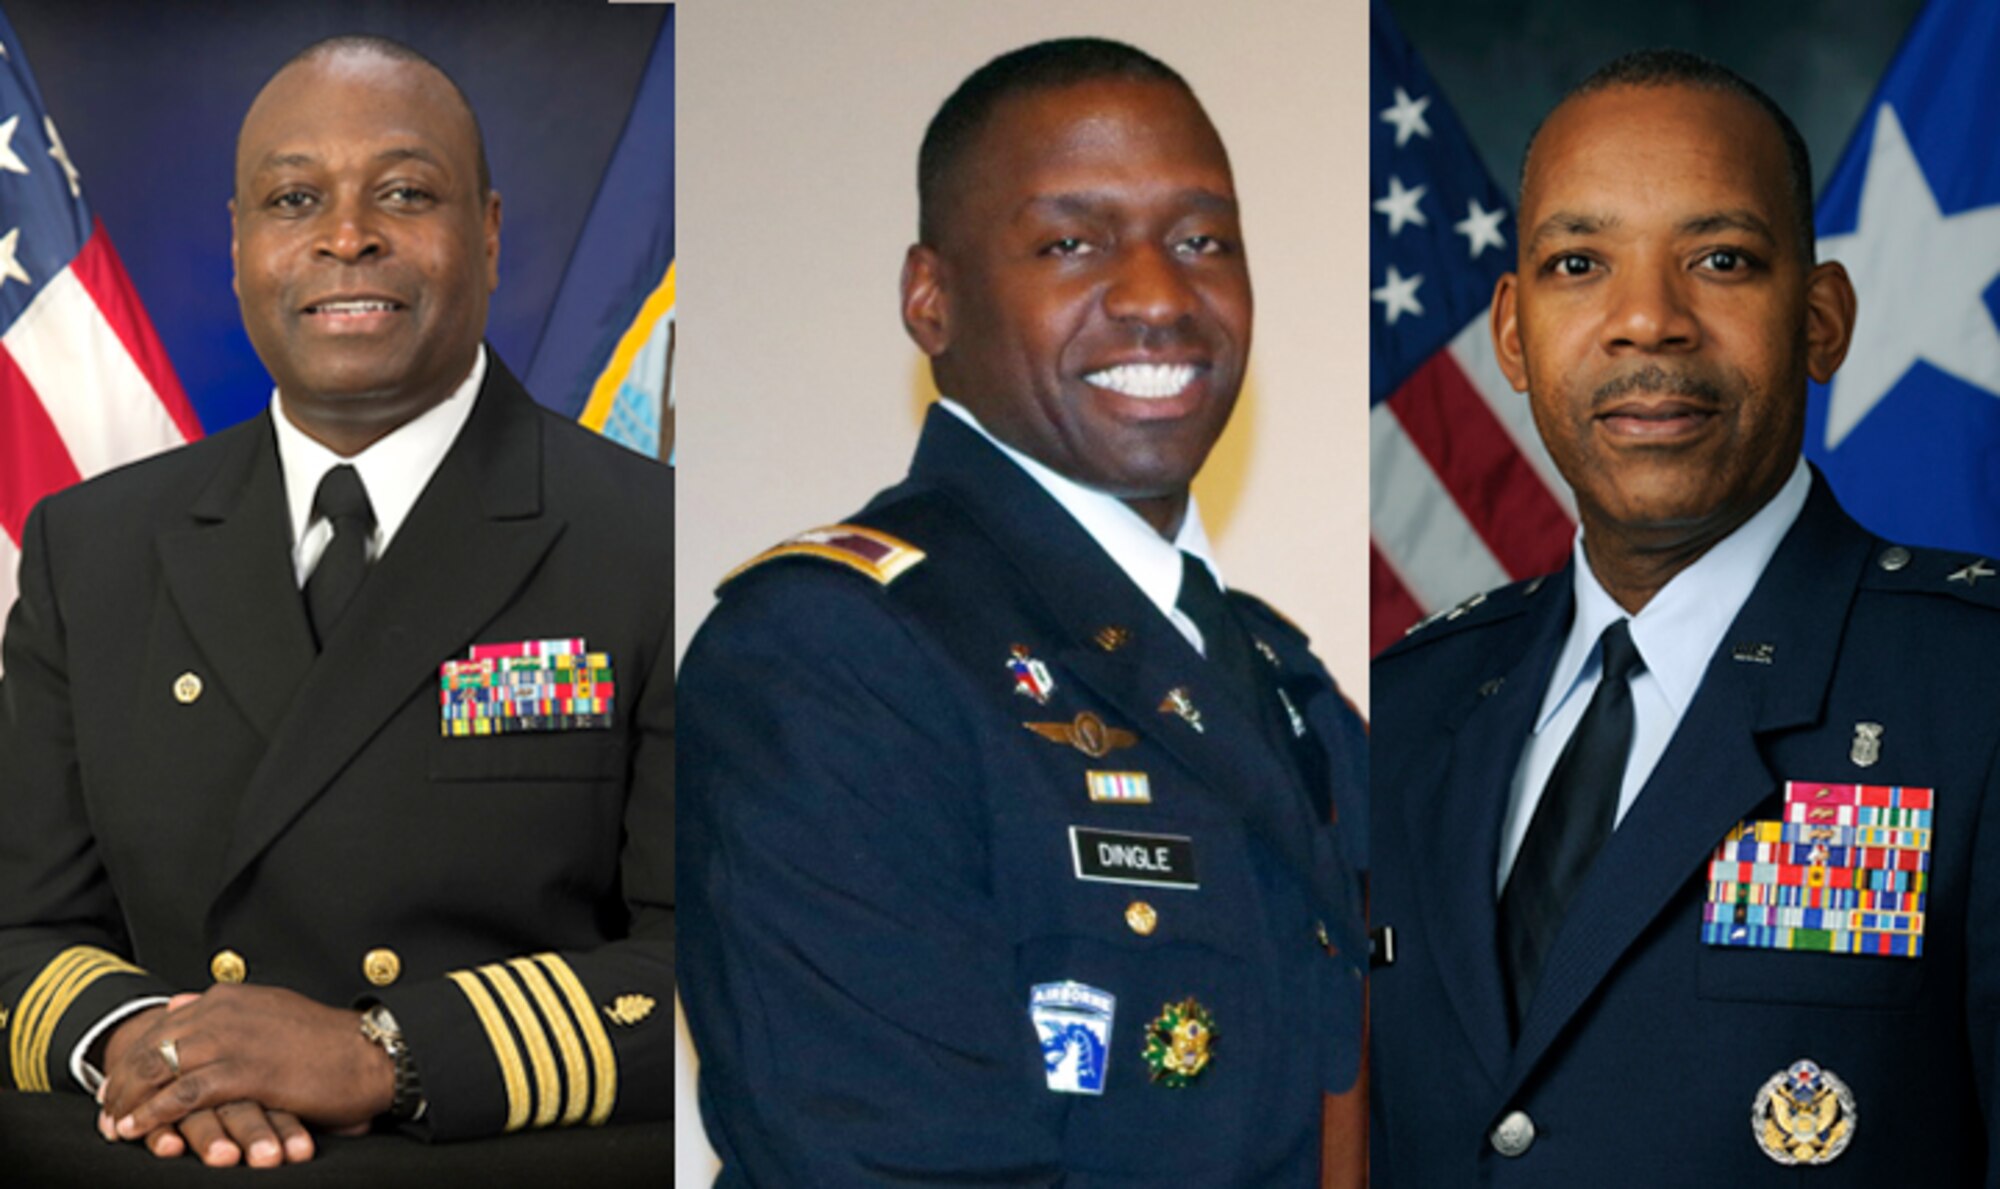 Navy Capt. Marvin Jones, Army Brig. Gen. Scott Dingle and Air Force Maj. Gen. Roosevelt Allen discuss the importance of mentors in their lives and careers.